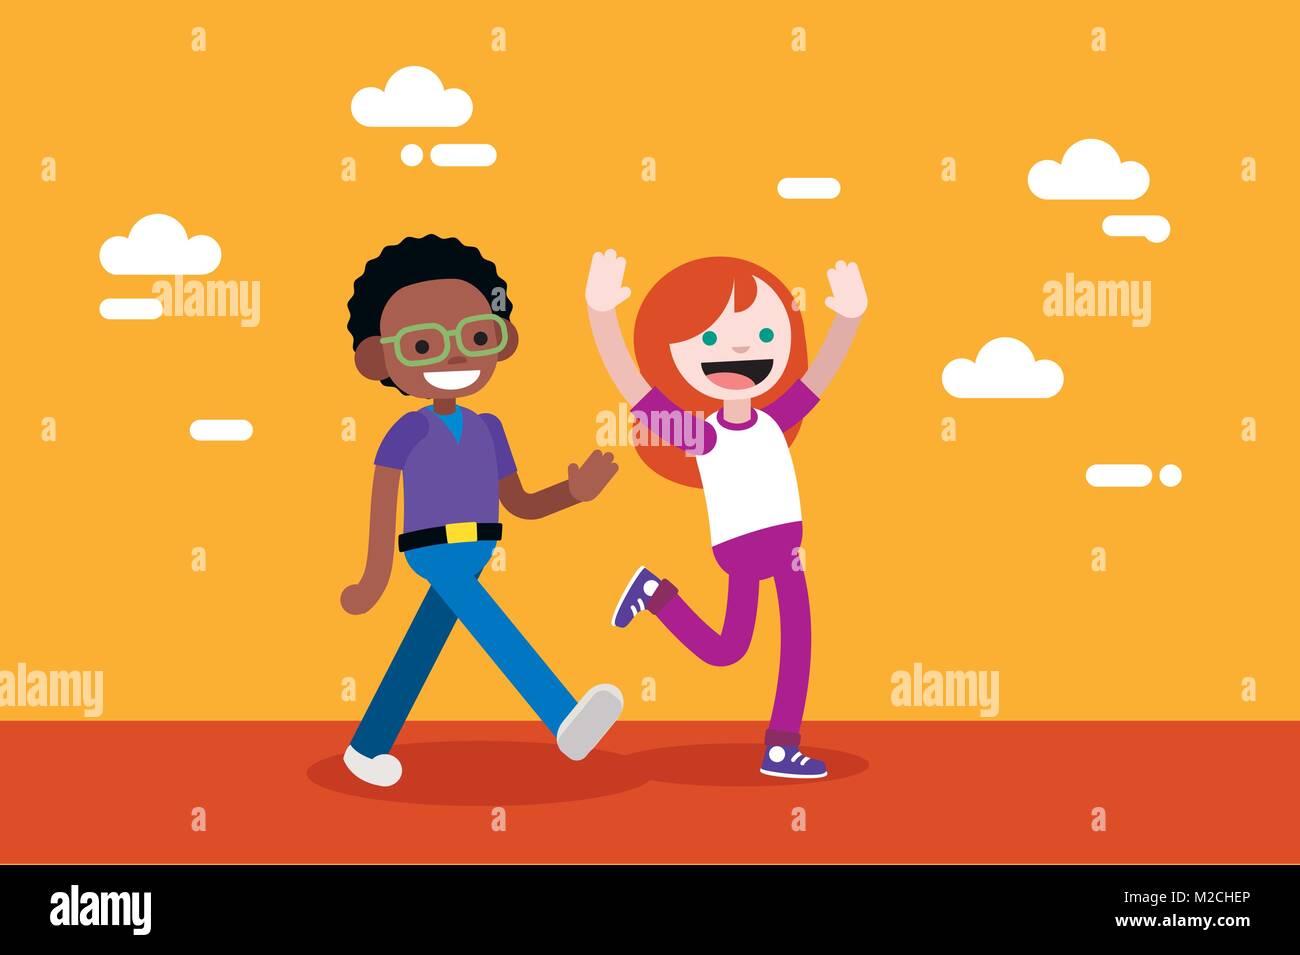 Cute Boy and Girl Walking and Greeting. Children vector illustration in flat, minimal, style. Stock Vector